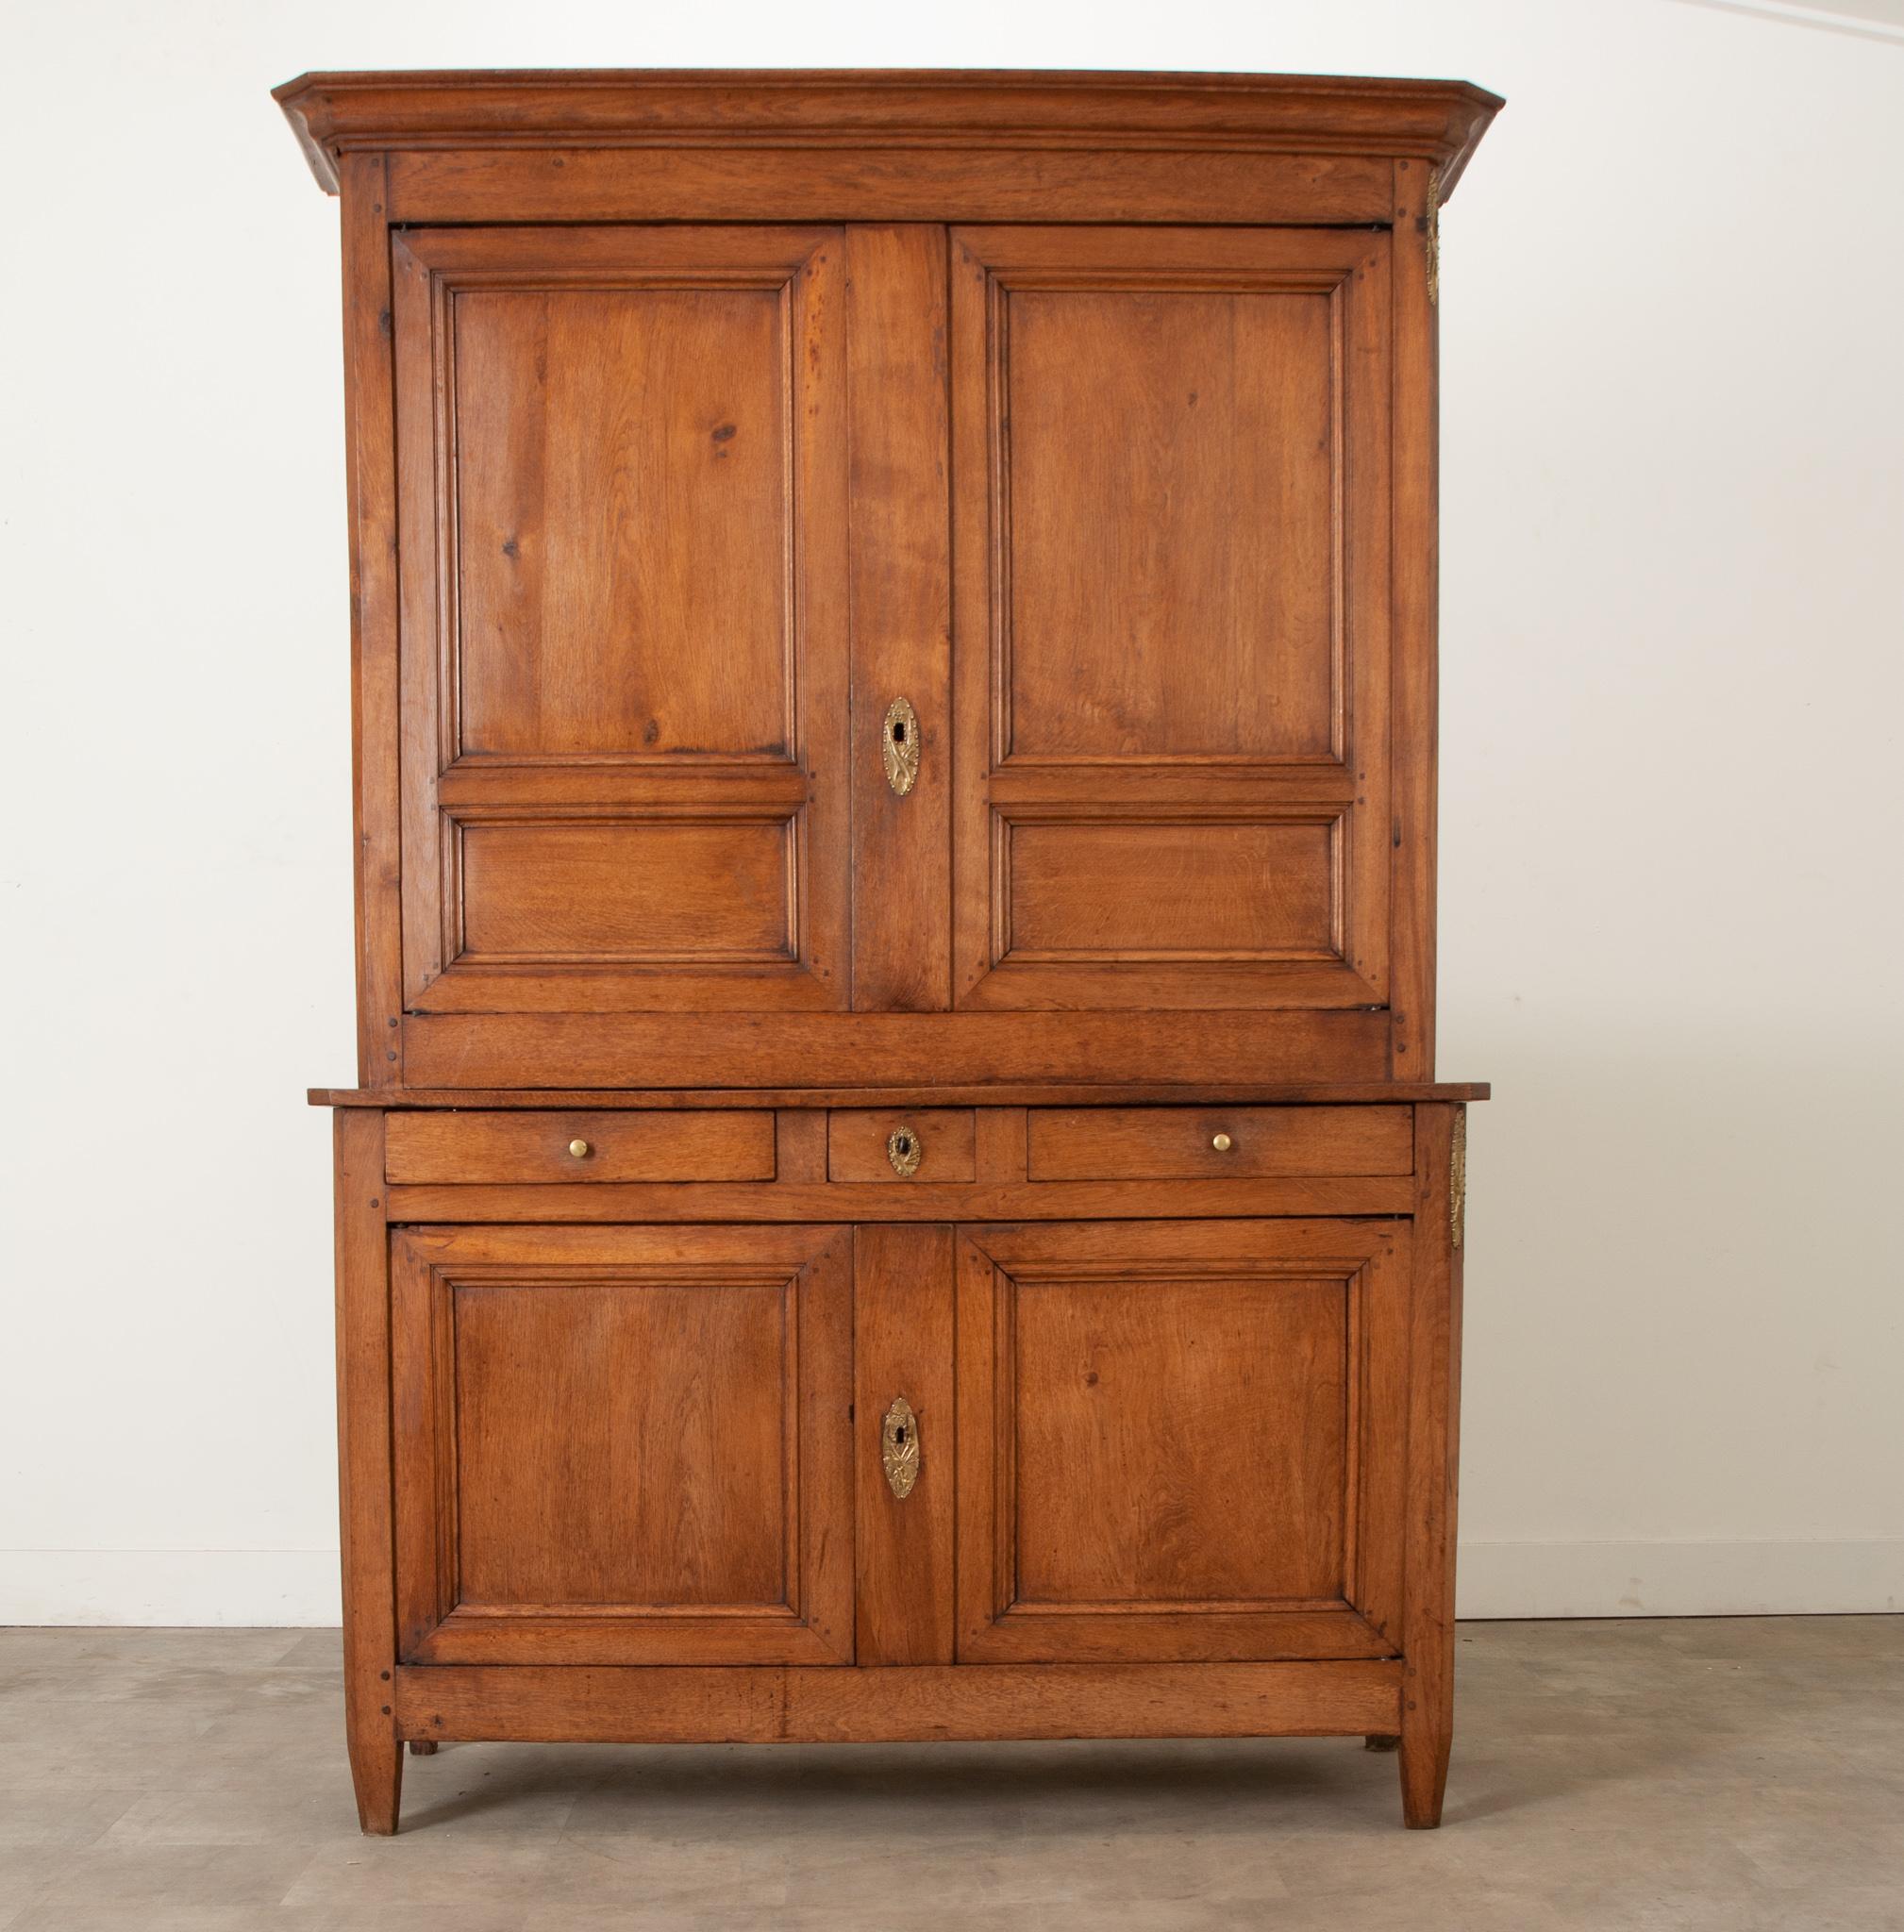 A gorgeous oak buffet à deux corps was hand built in the 1800's from solid light oak. Simple in style this paneled buffet is unique and practical. The top half of the buffet is 51 ¼”D with two paneled door fronts and two interior fixed shelves